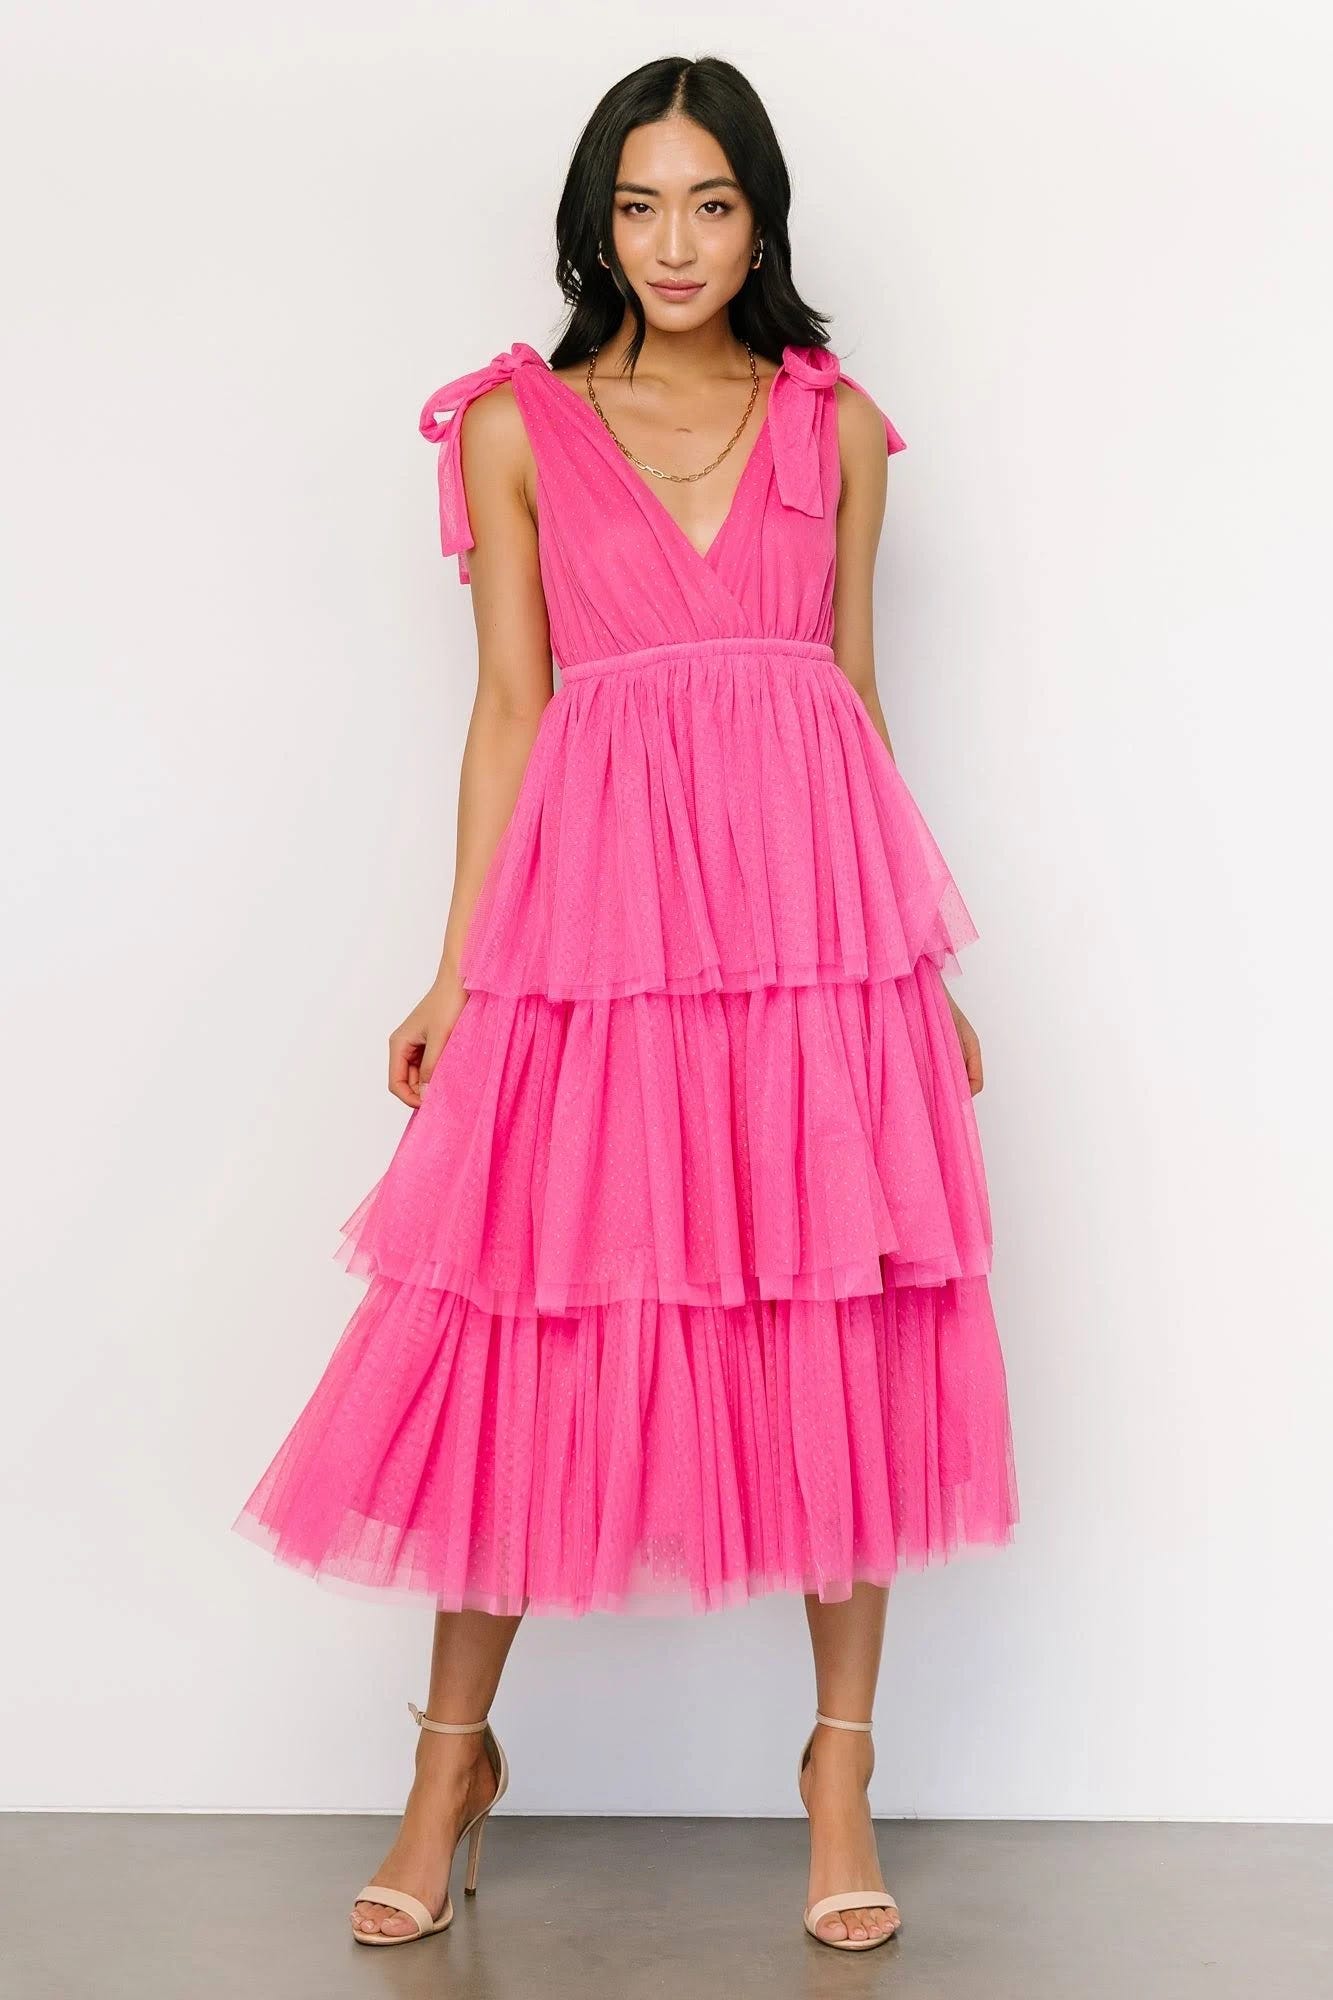 Sleek Tiered Tulle Tank Dress in Hot Pink | Image